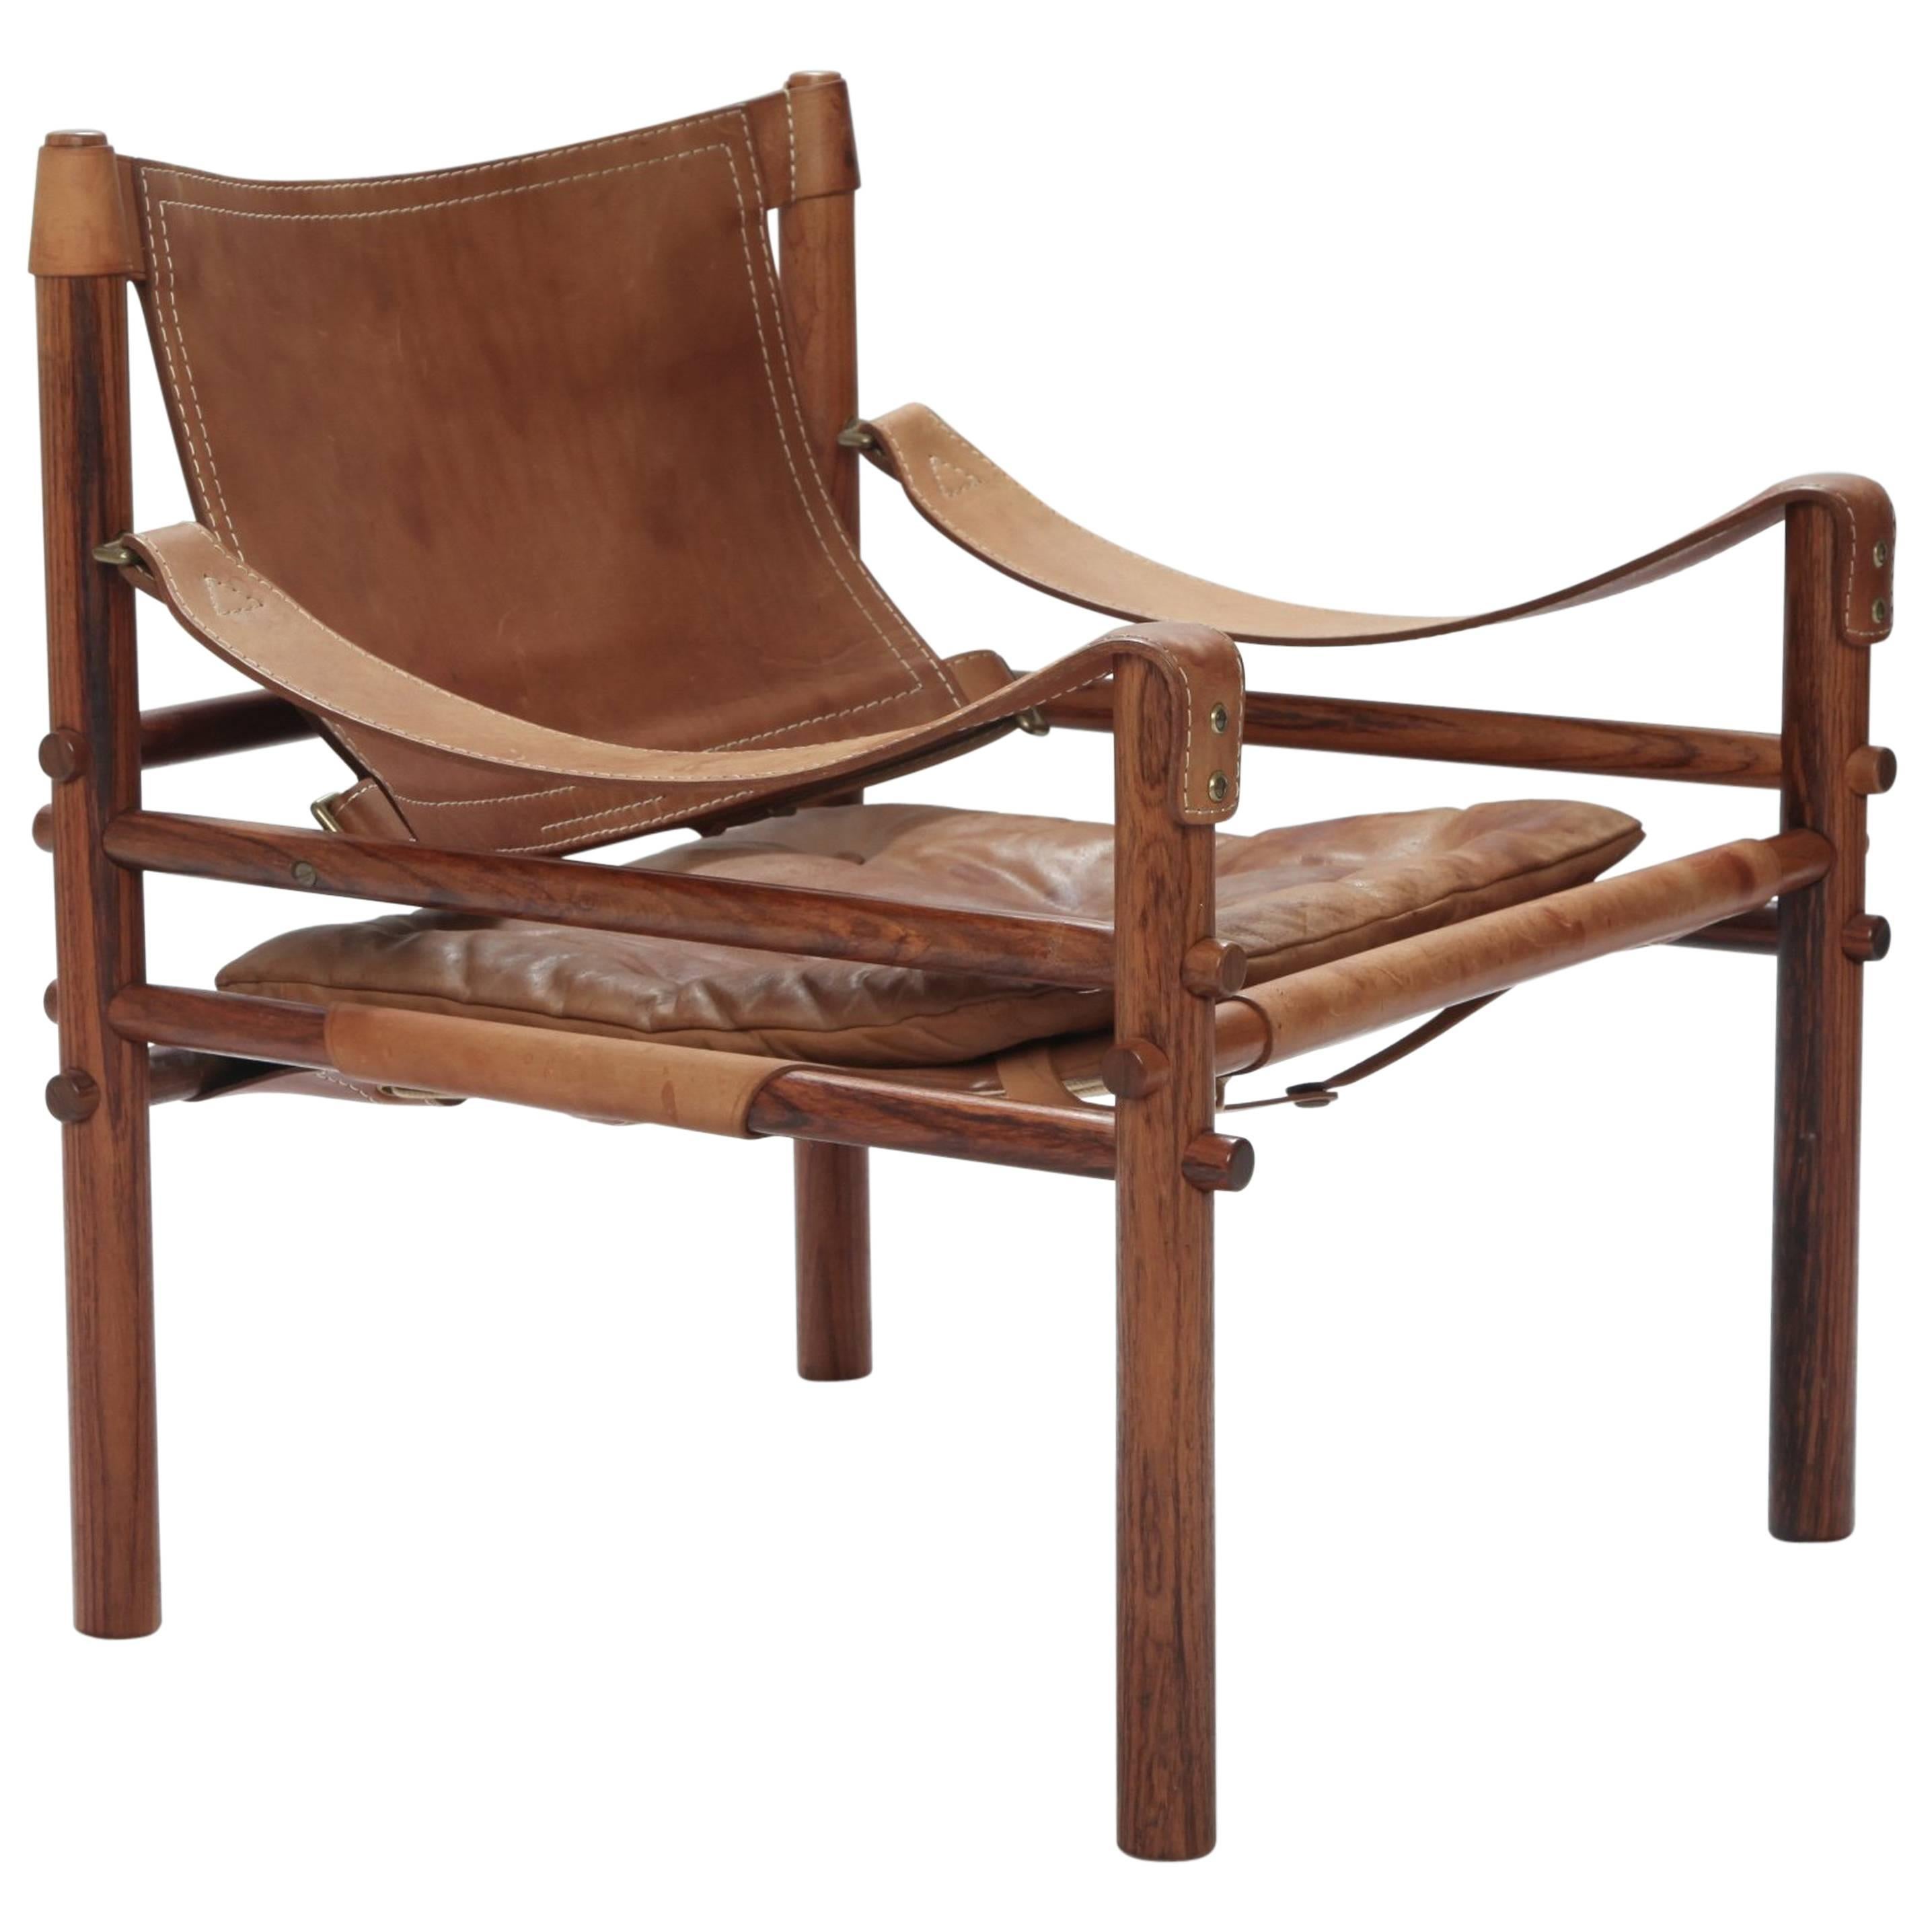 Arne Norell Rosewood Safair Sirocco Chair, Sweden, 1960s